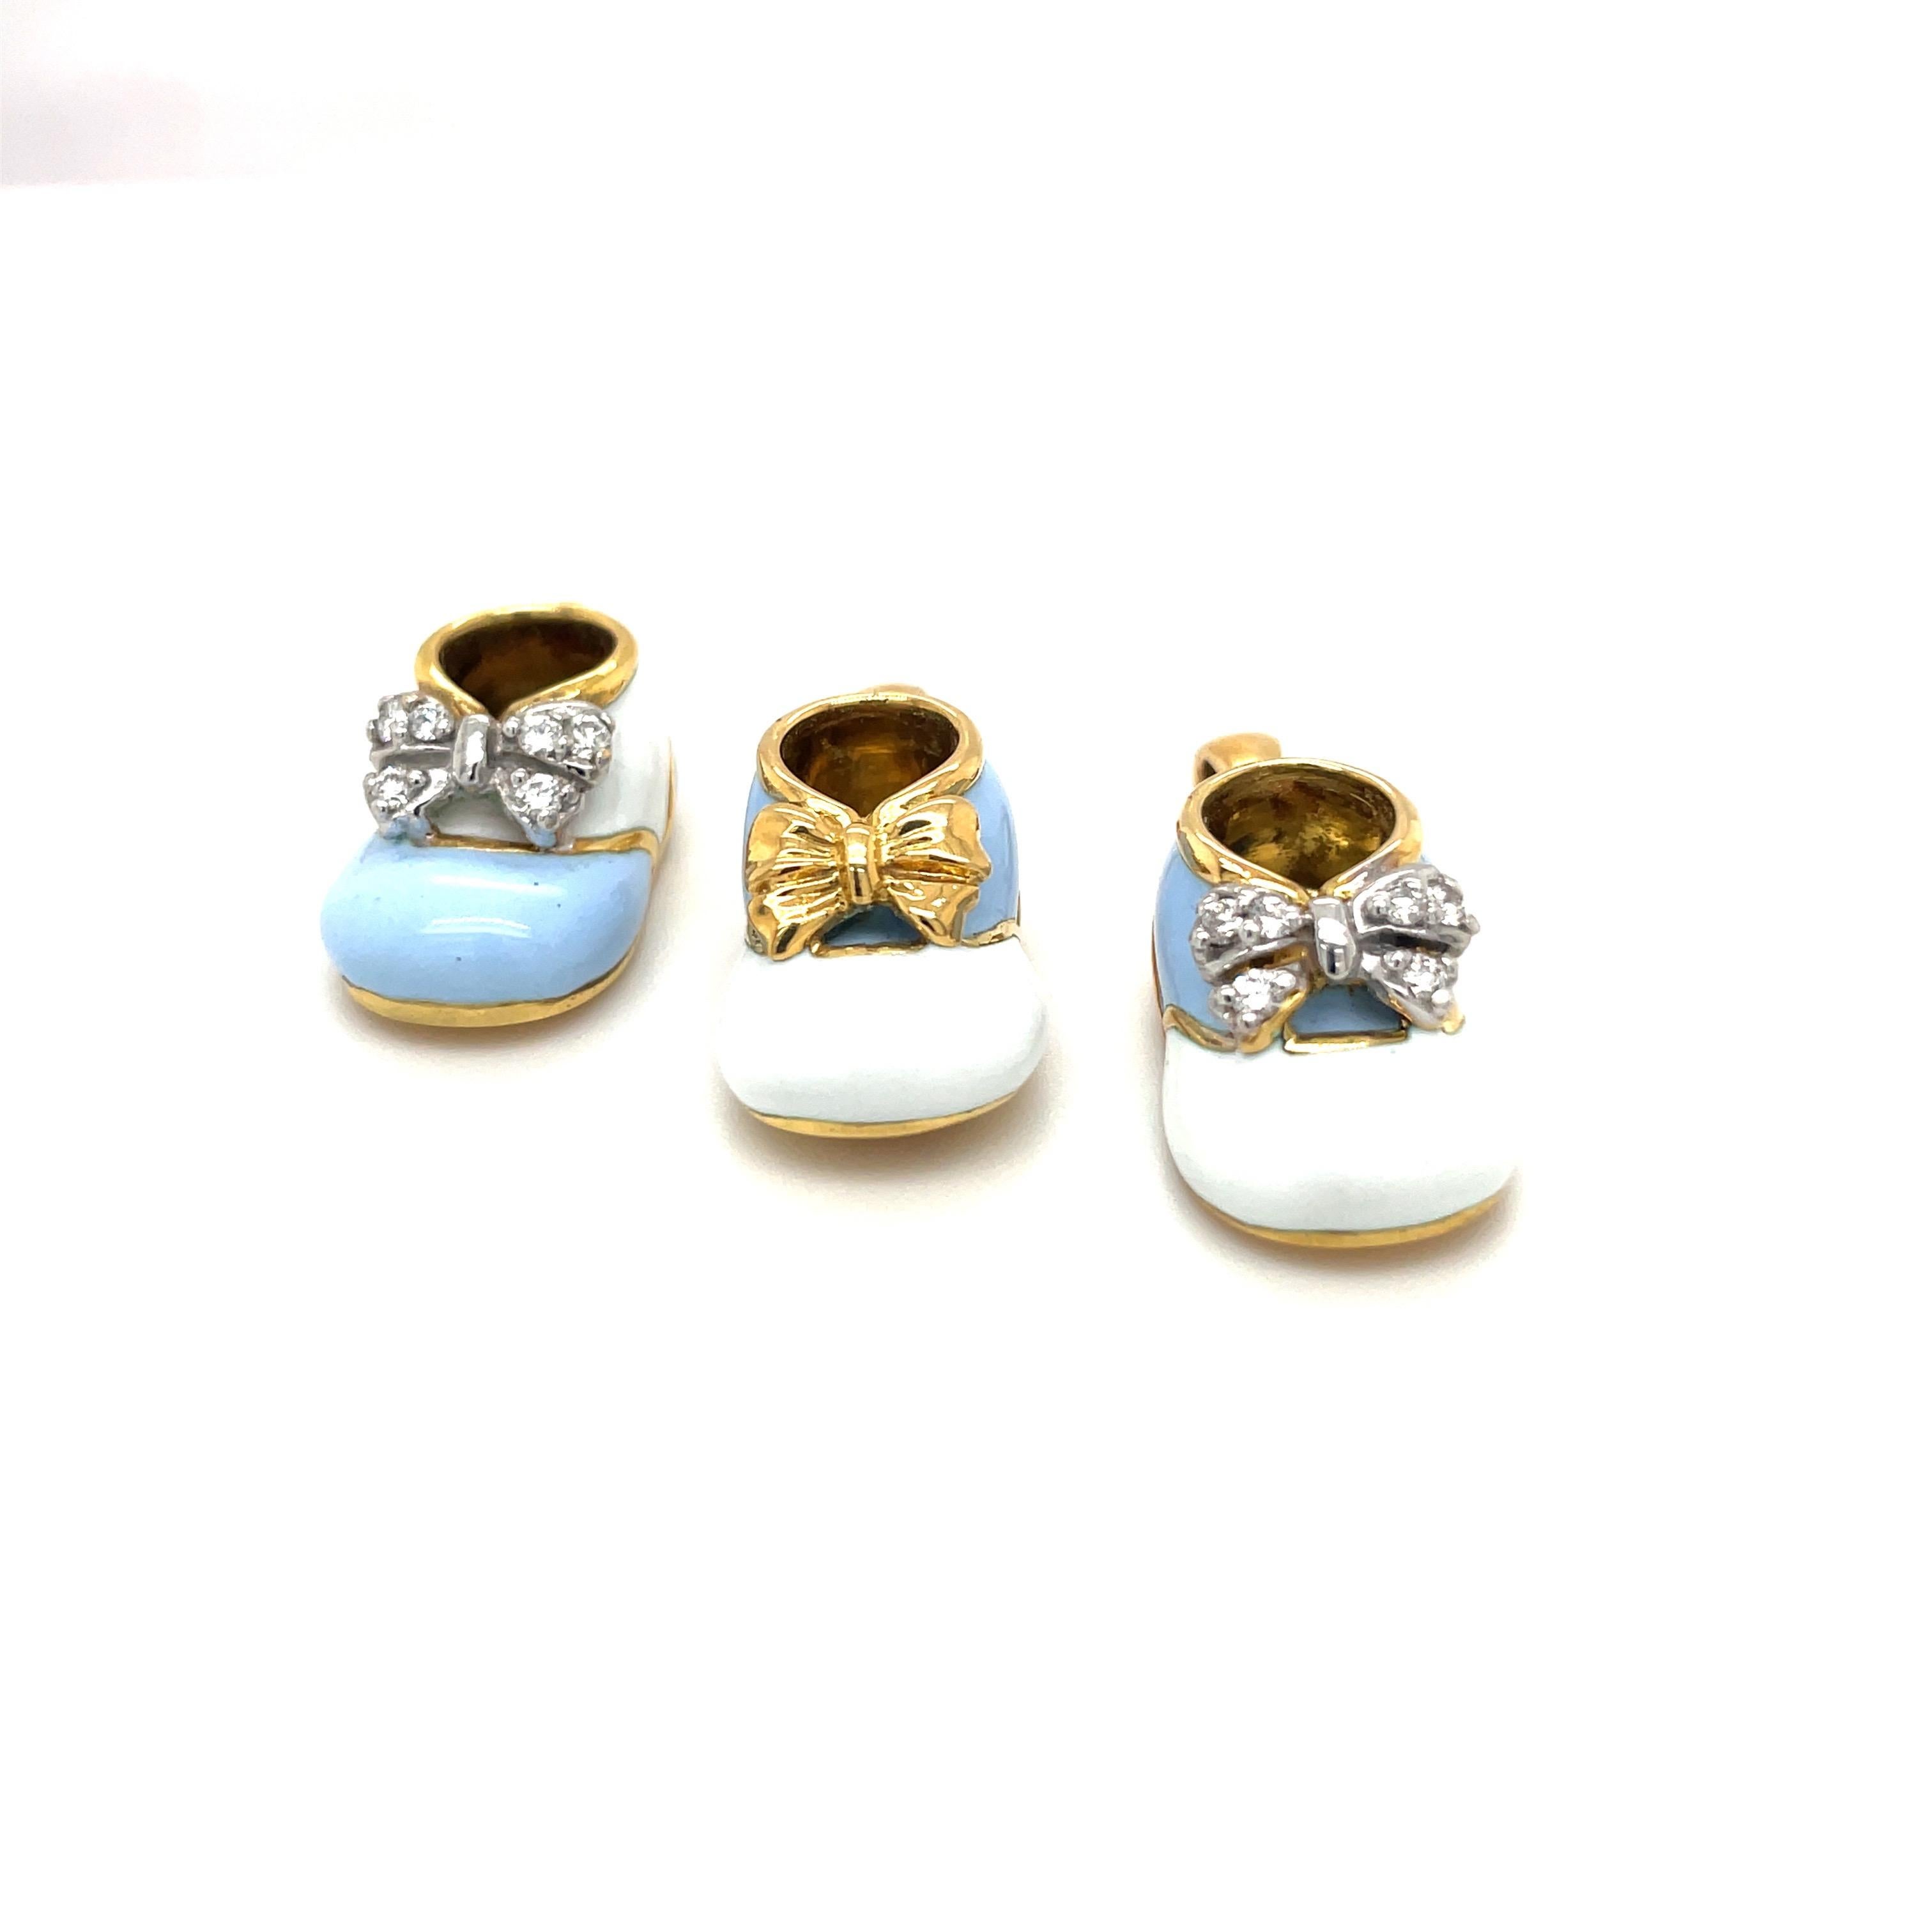 Women's or Men's 18KT Yellow Gold Baby Shoe with Light Blue/White Enamel & Gold Bow